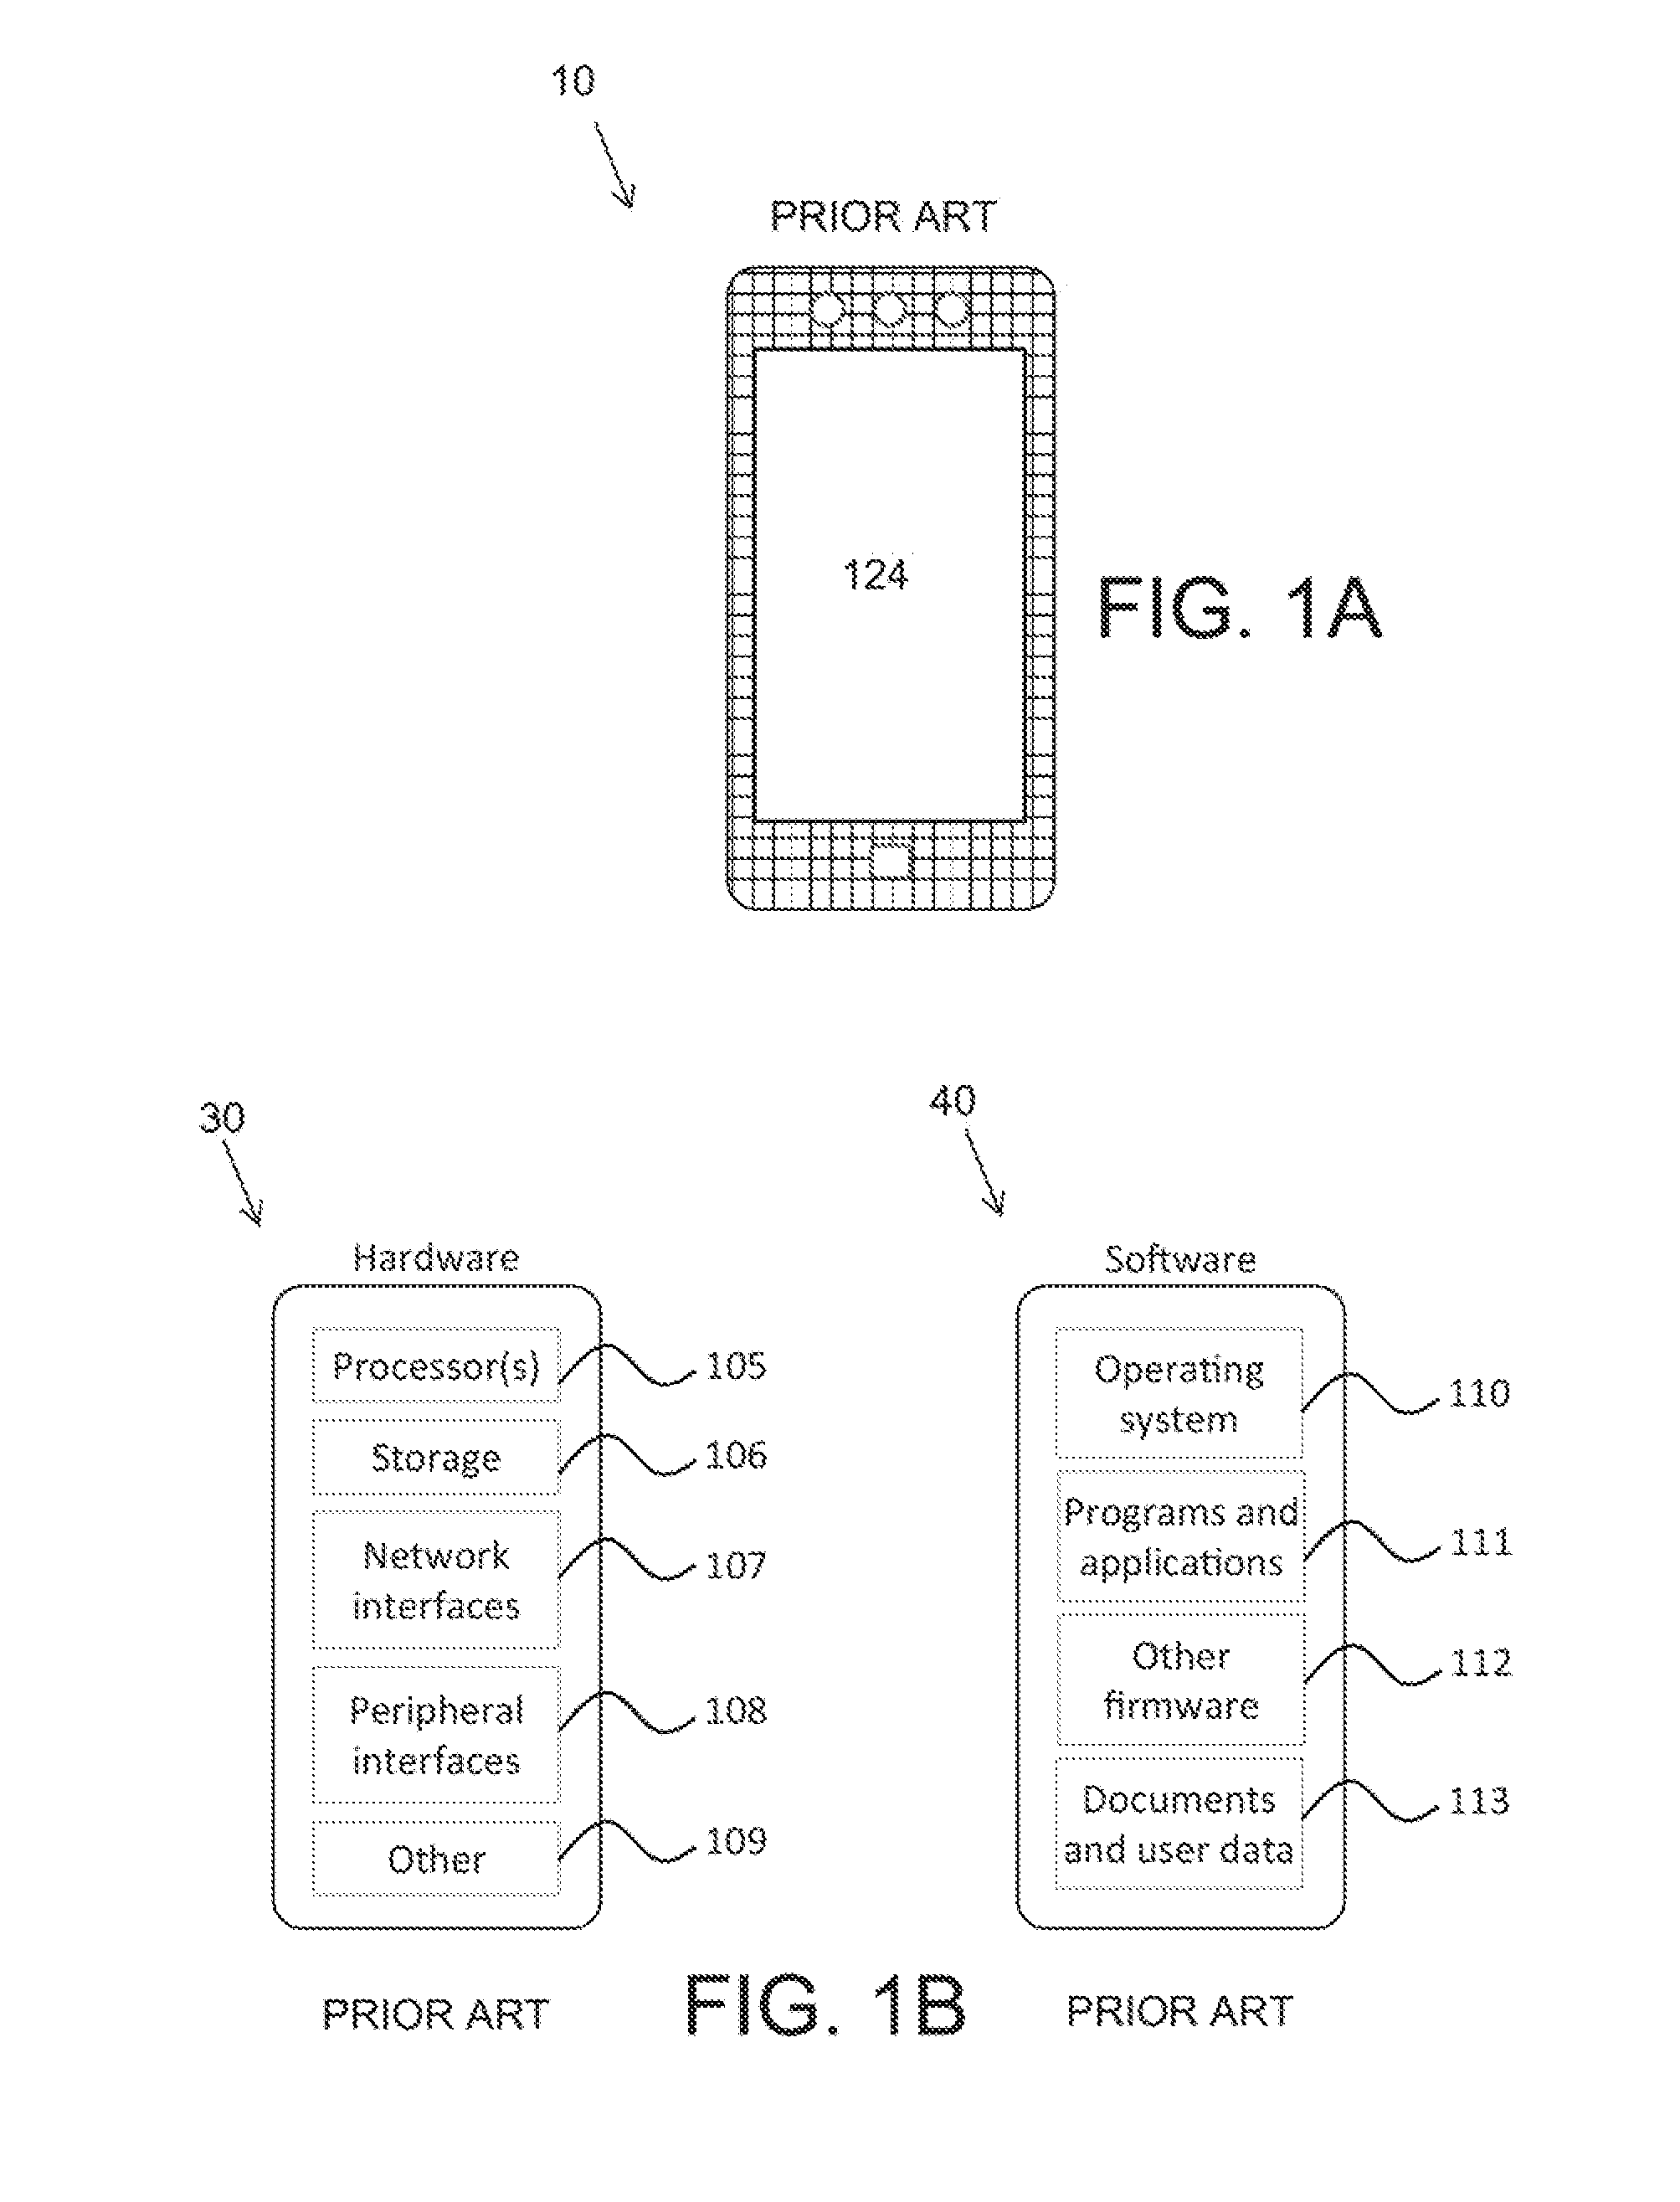 Method of single-handed software operation of large form factor mobile electronic devices